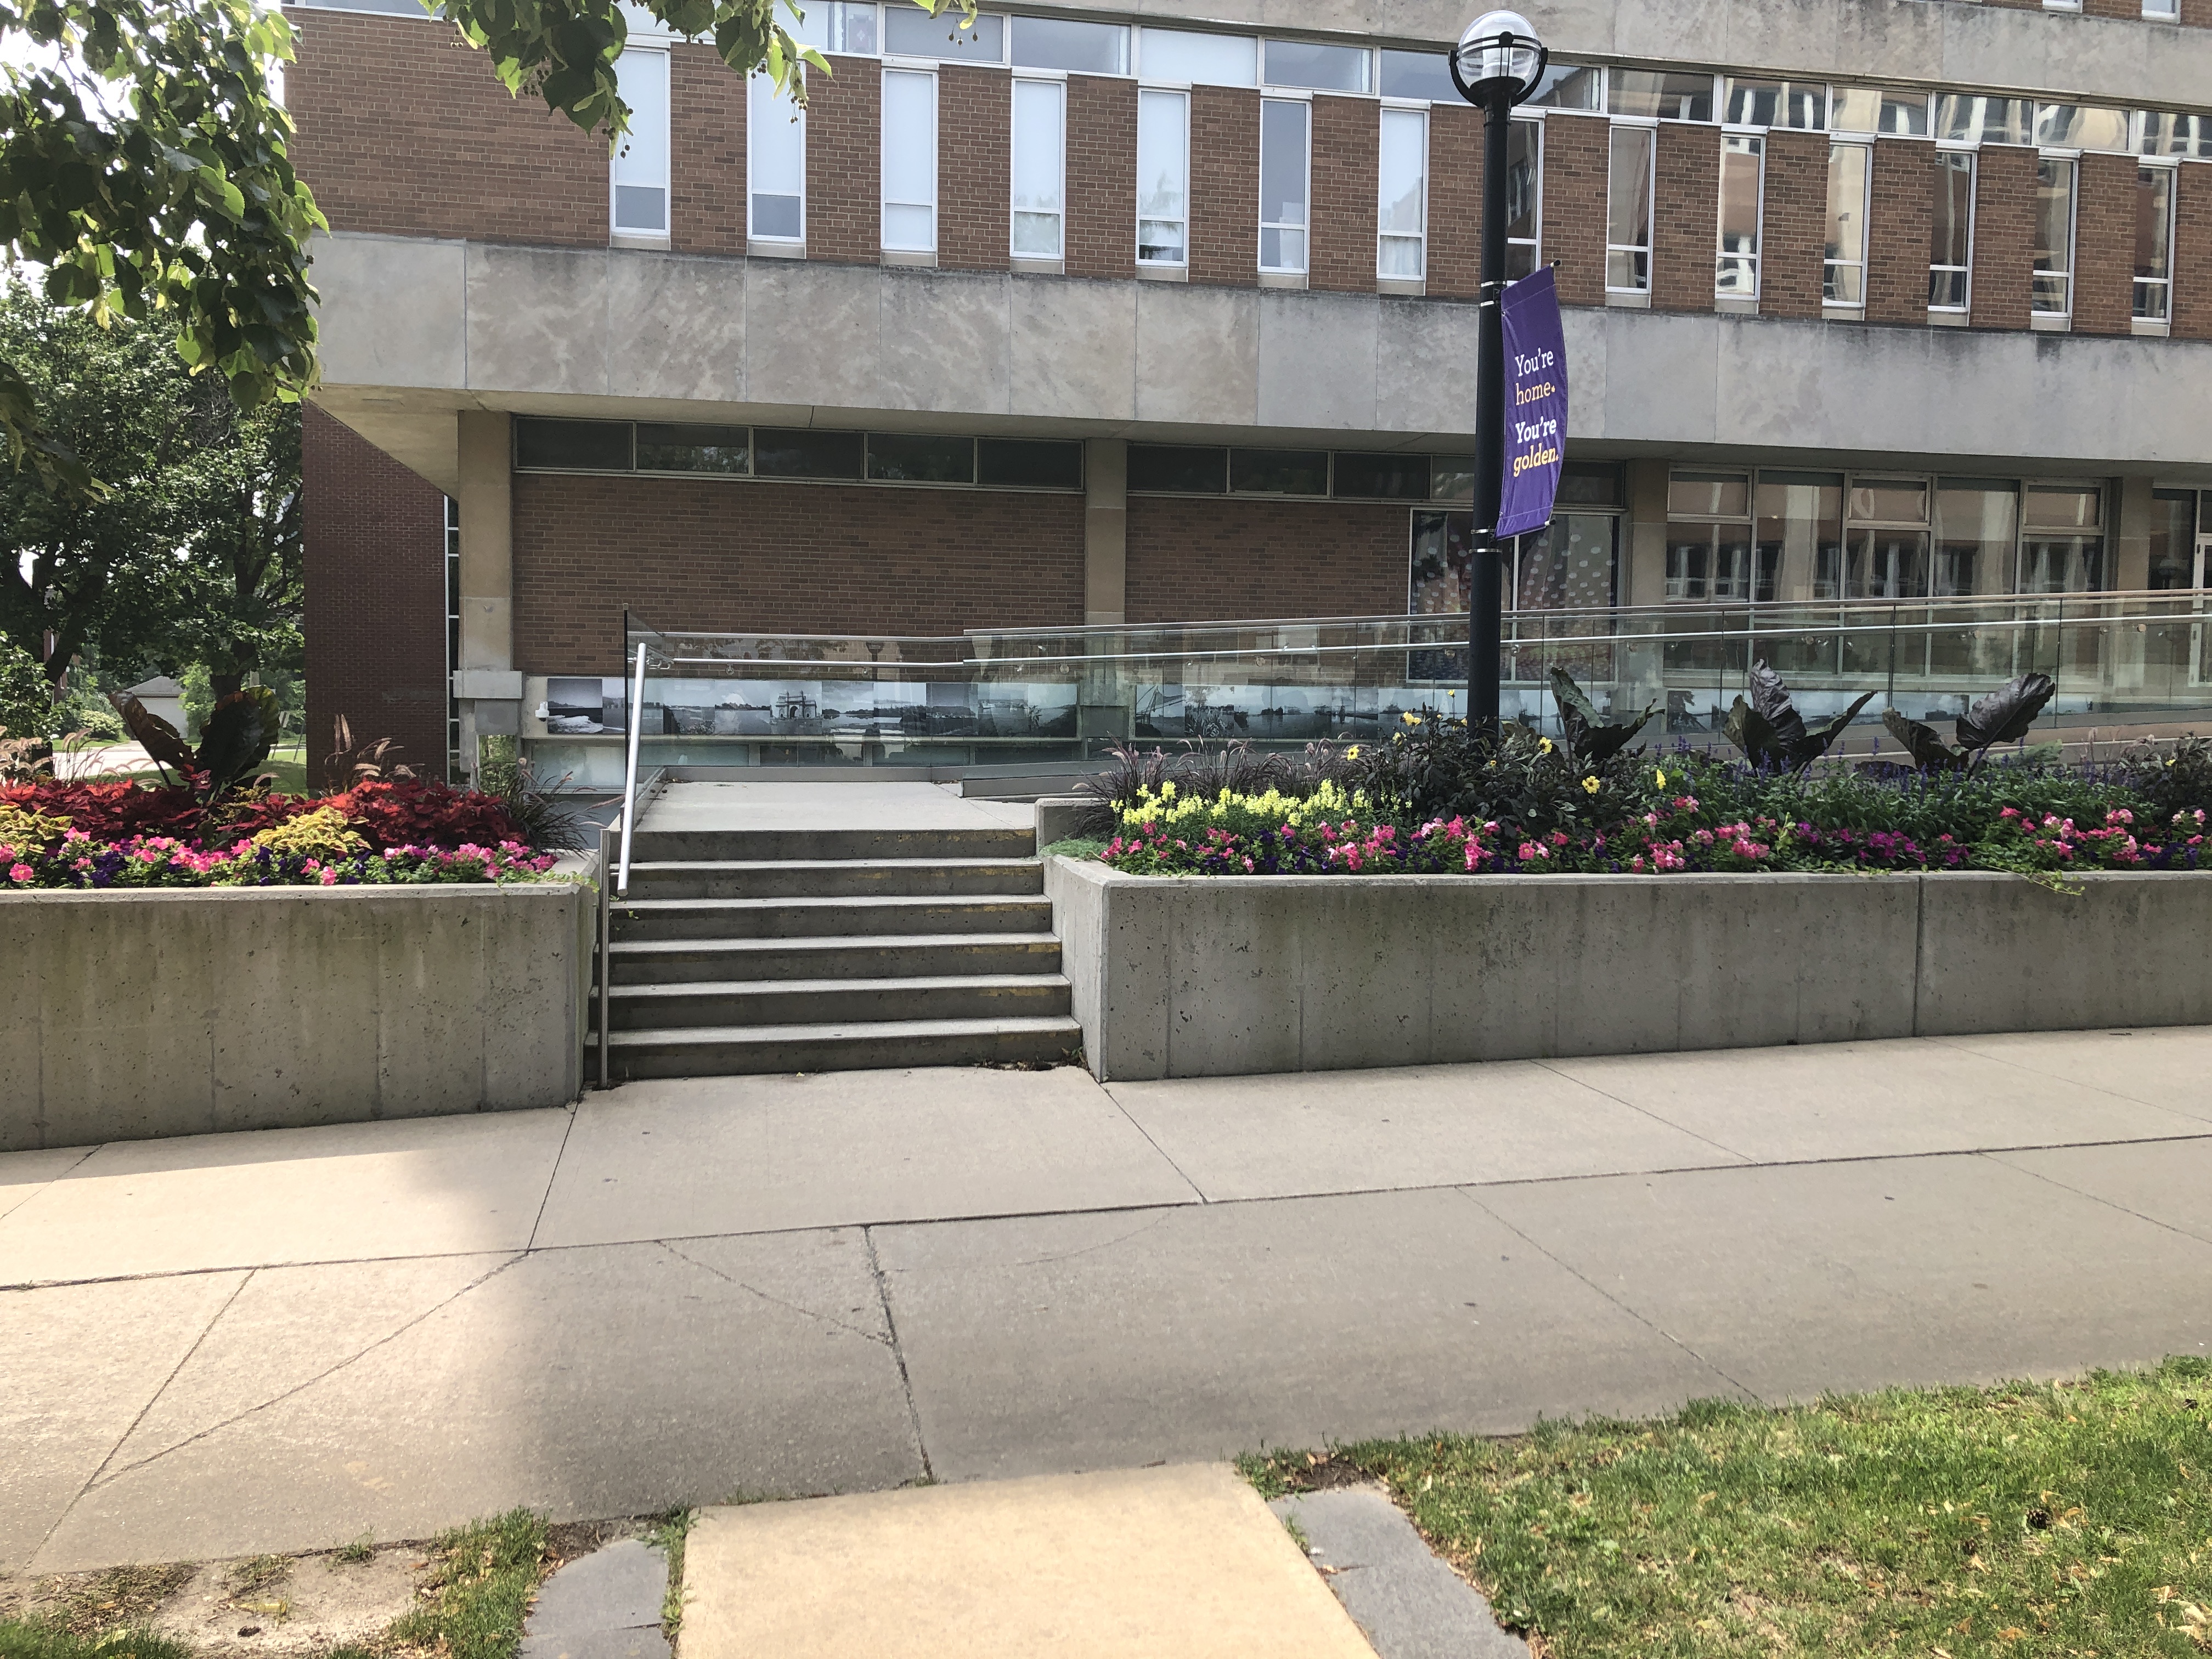 Front entrance to library, stairs and ramp. Flowers in summer